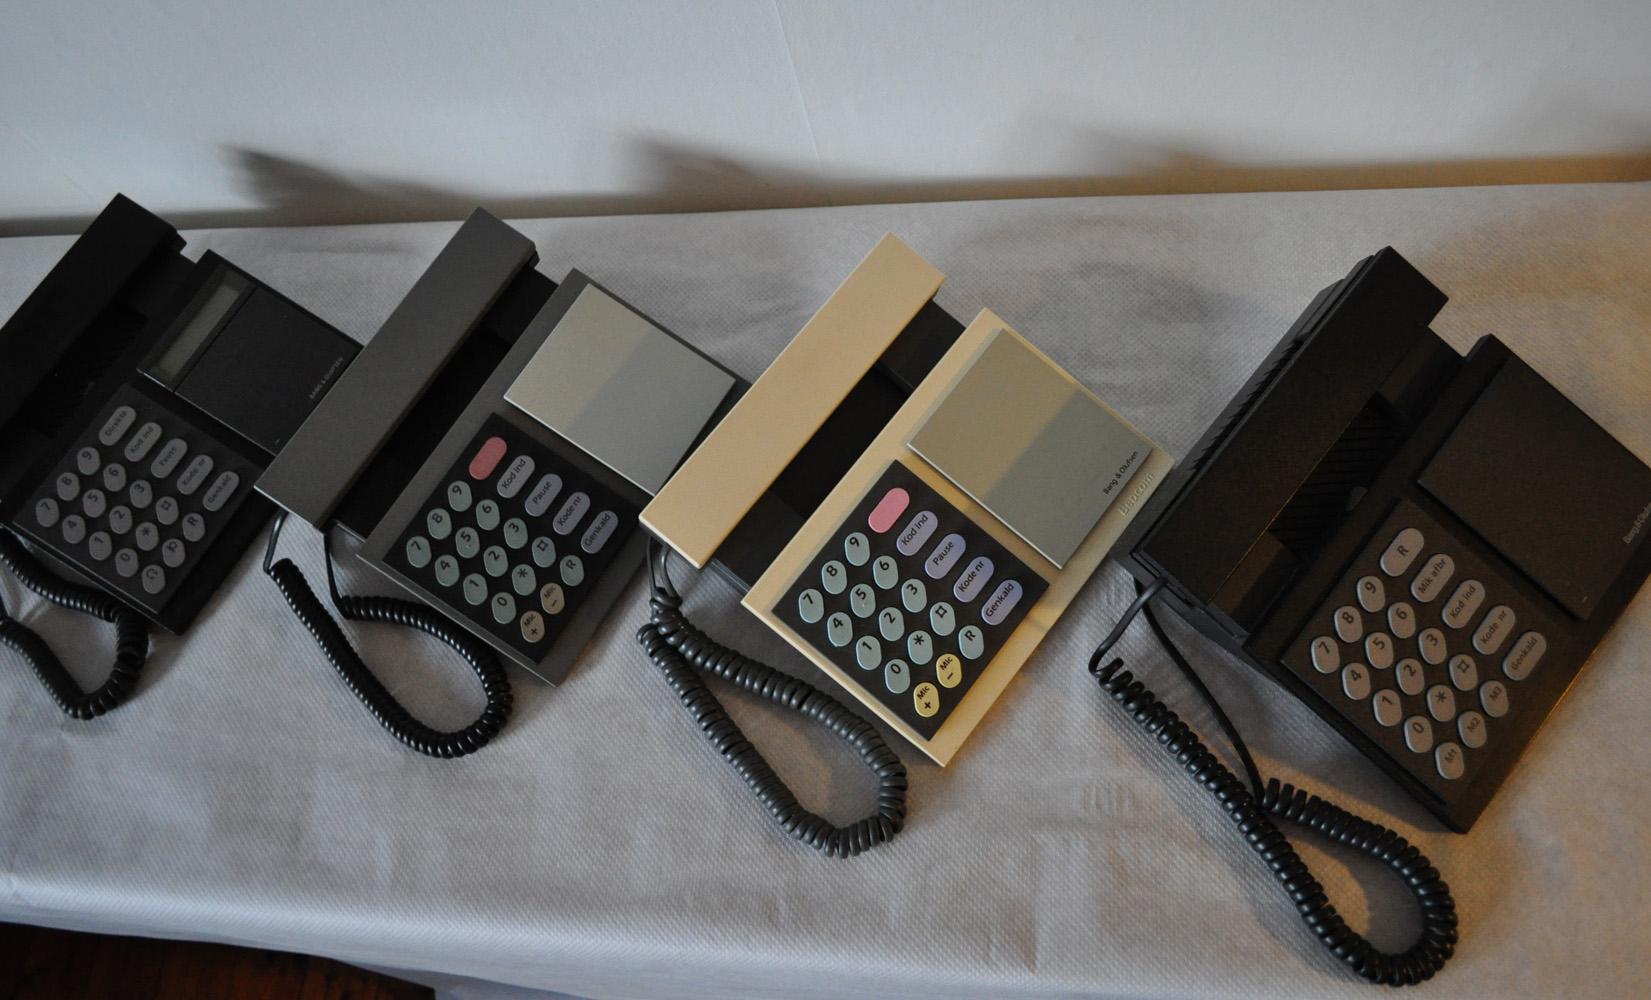 Scandinavian Modern Iconic Beocom 1000 Telephone from 1986 by Bang & Olusfen For Sale